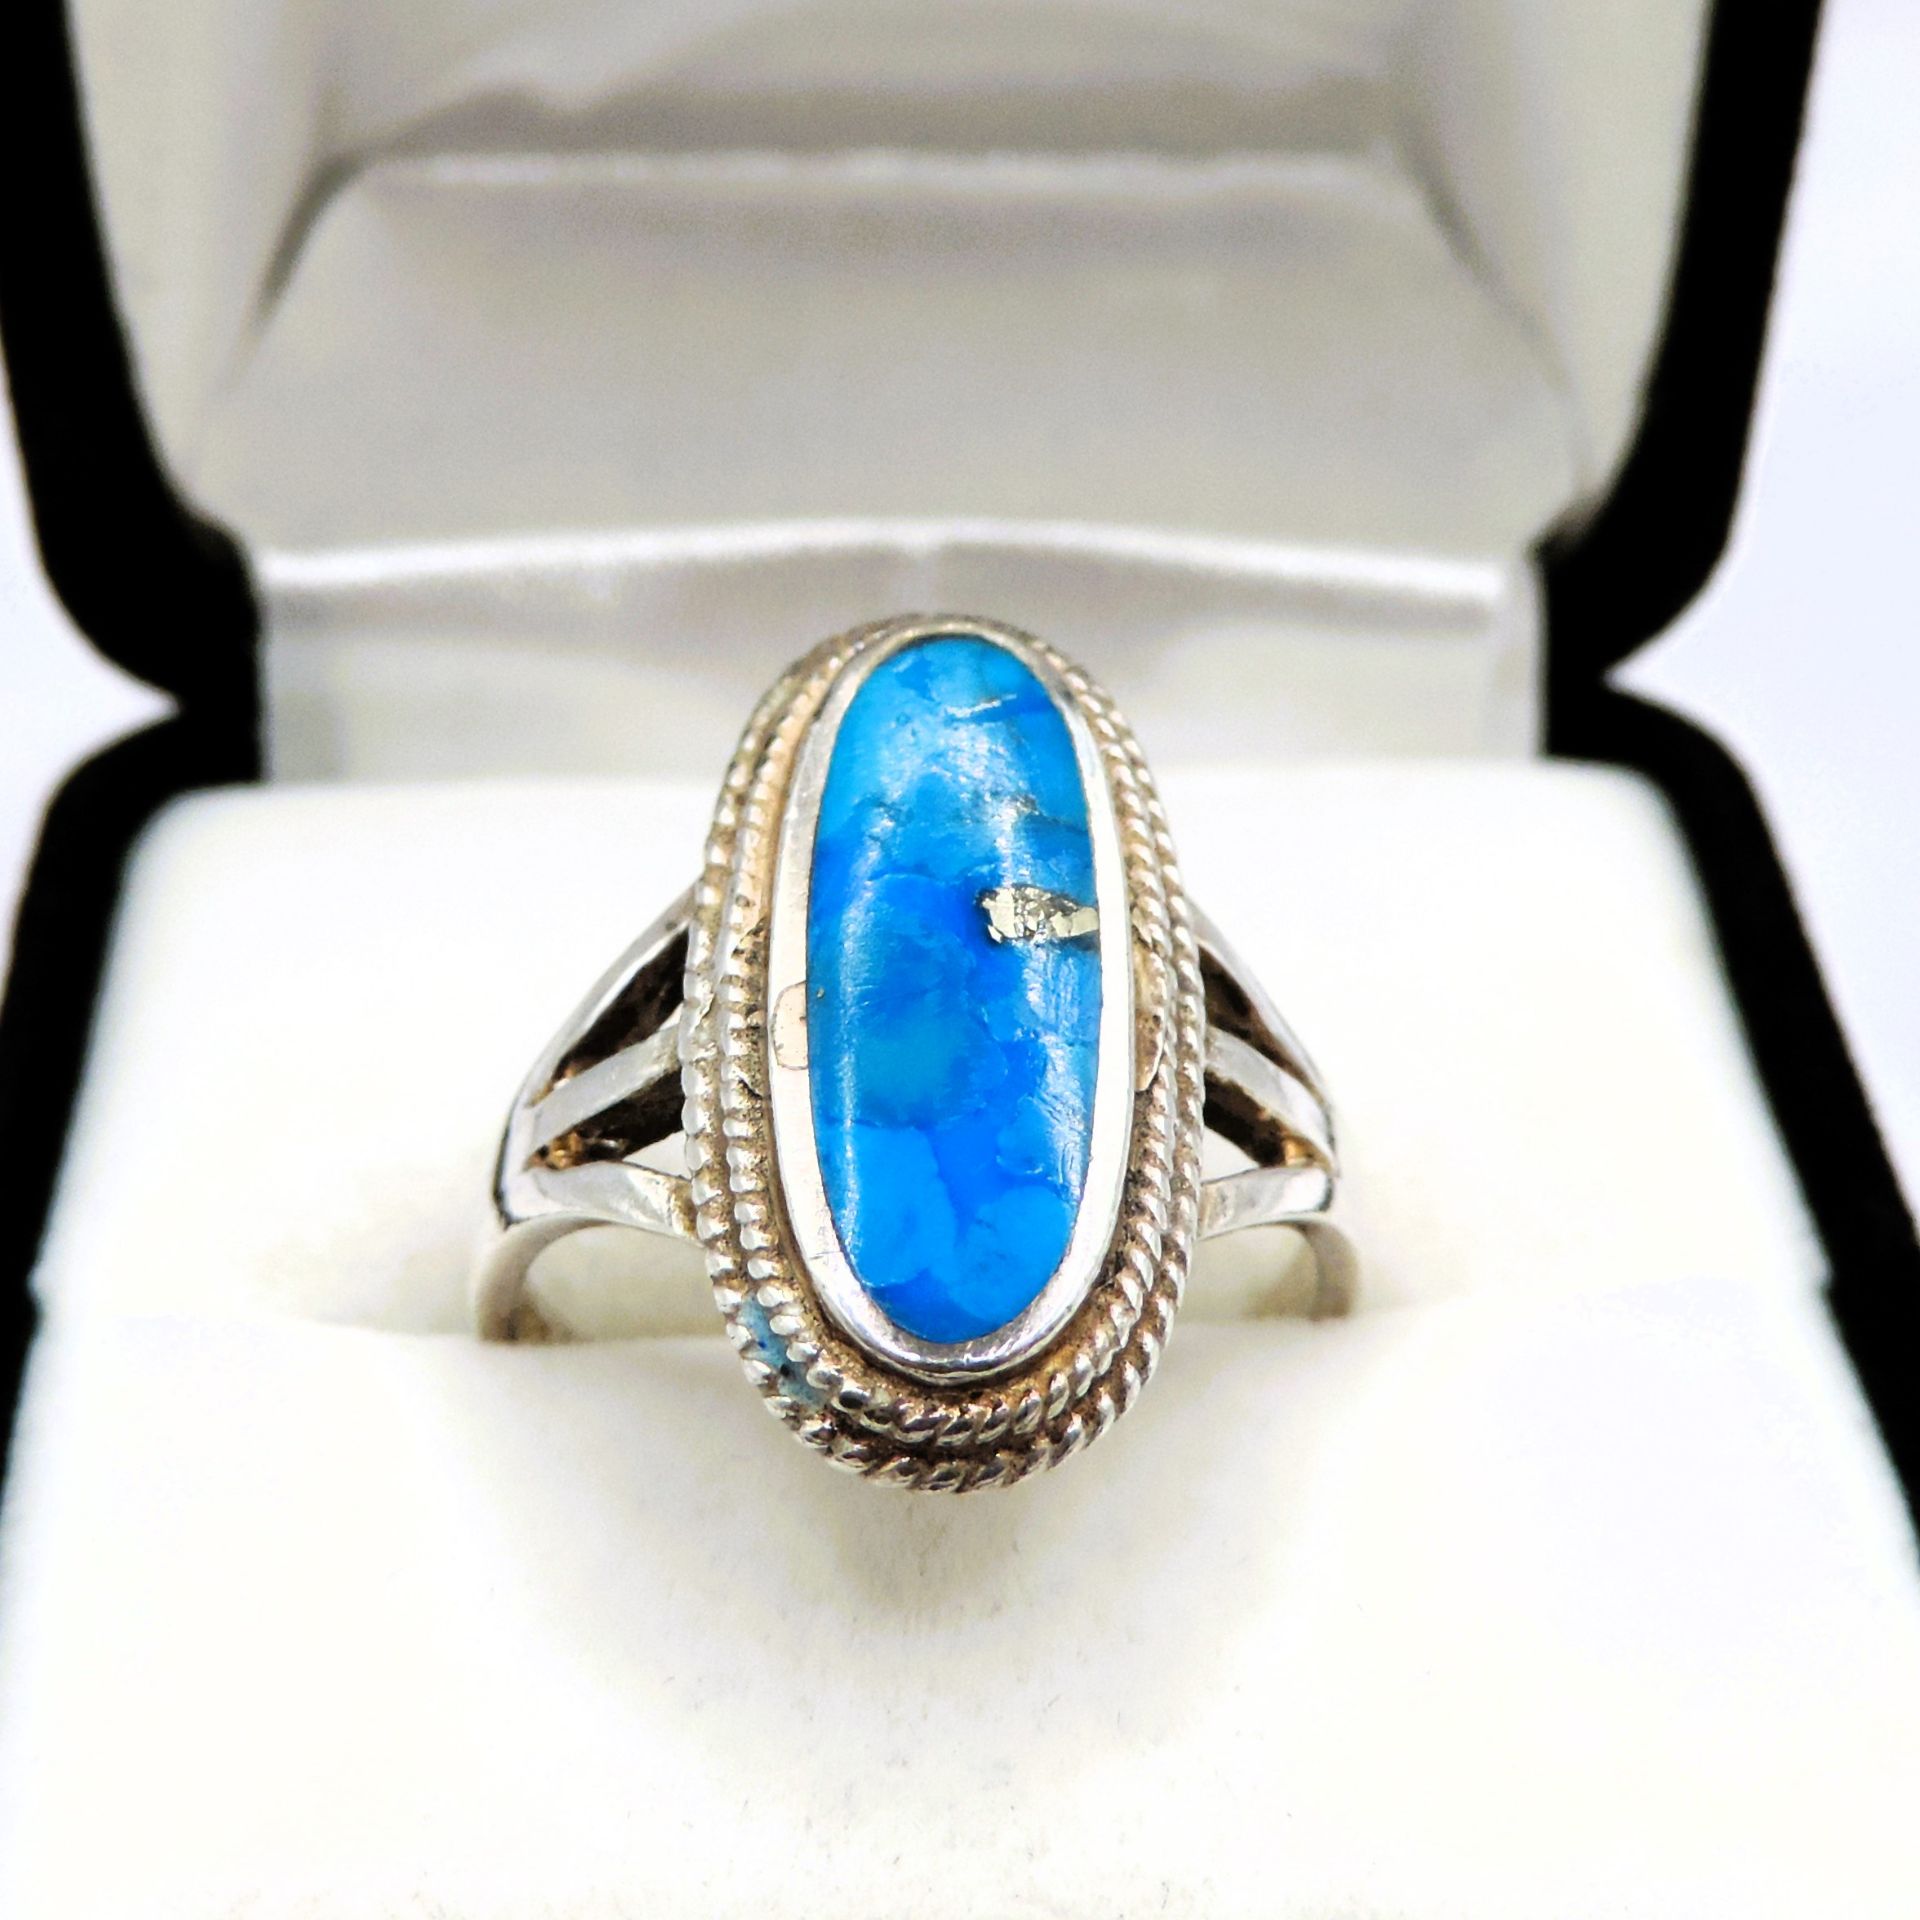 Artisan Sterling Silver Apatite Gemstone Ring. A fine quality Sterling silver ring set with an Apati